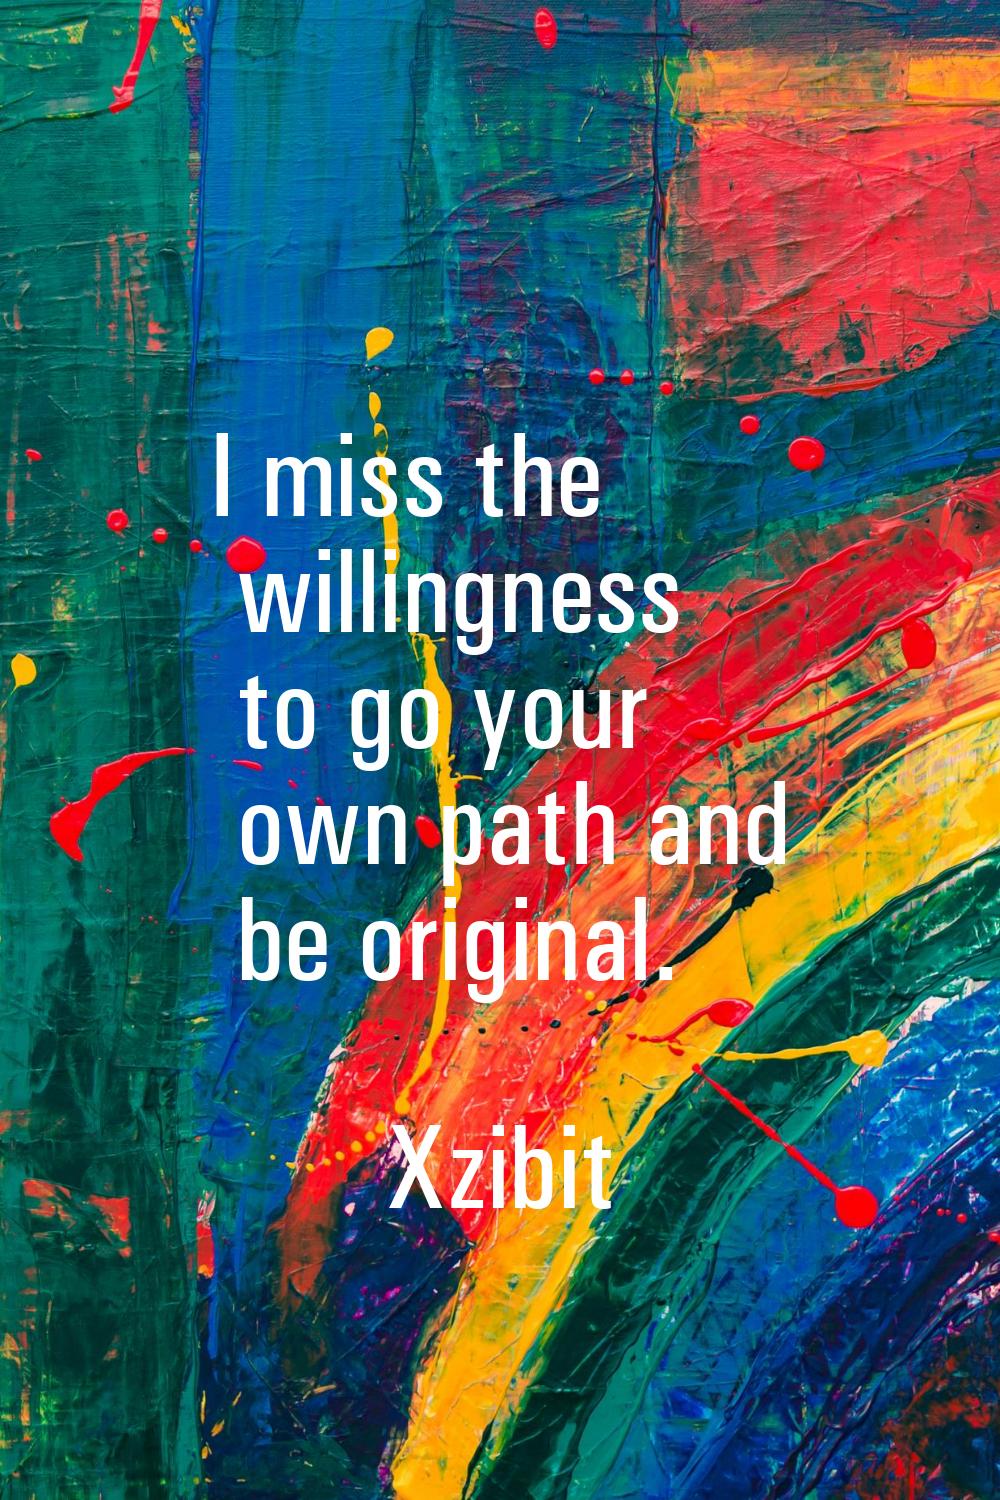 I miss the willingness to go your own path and be original.